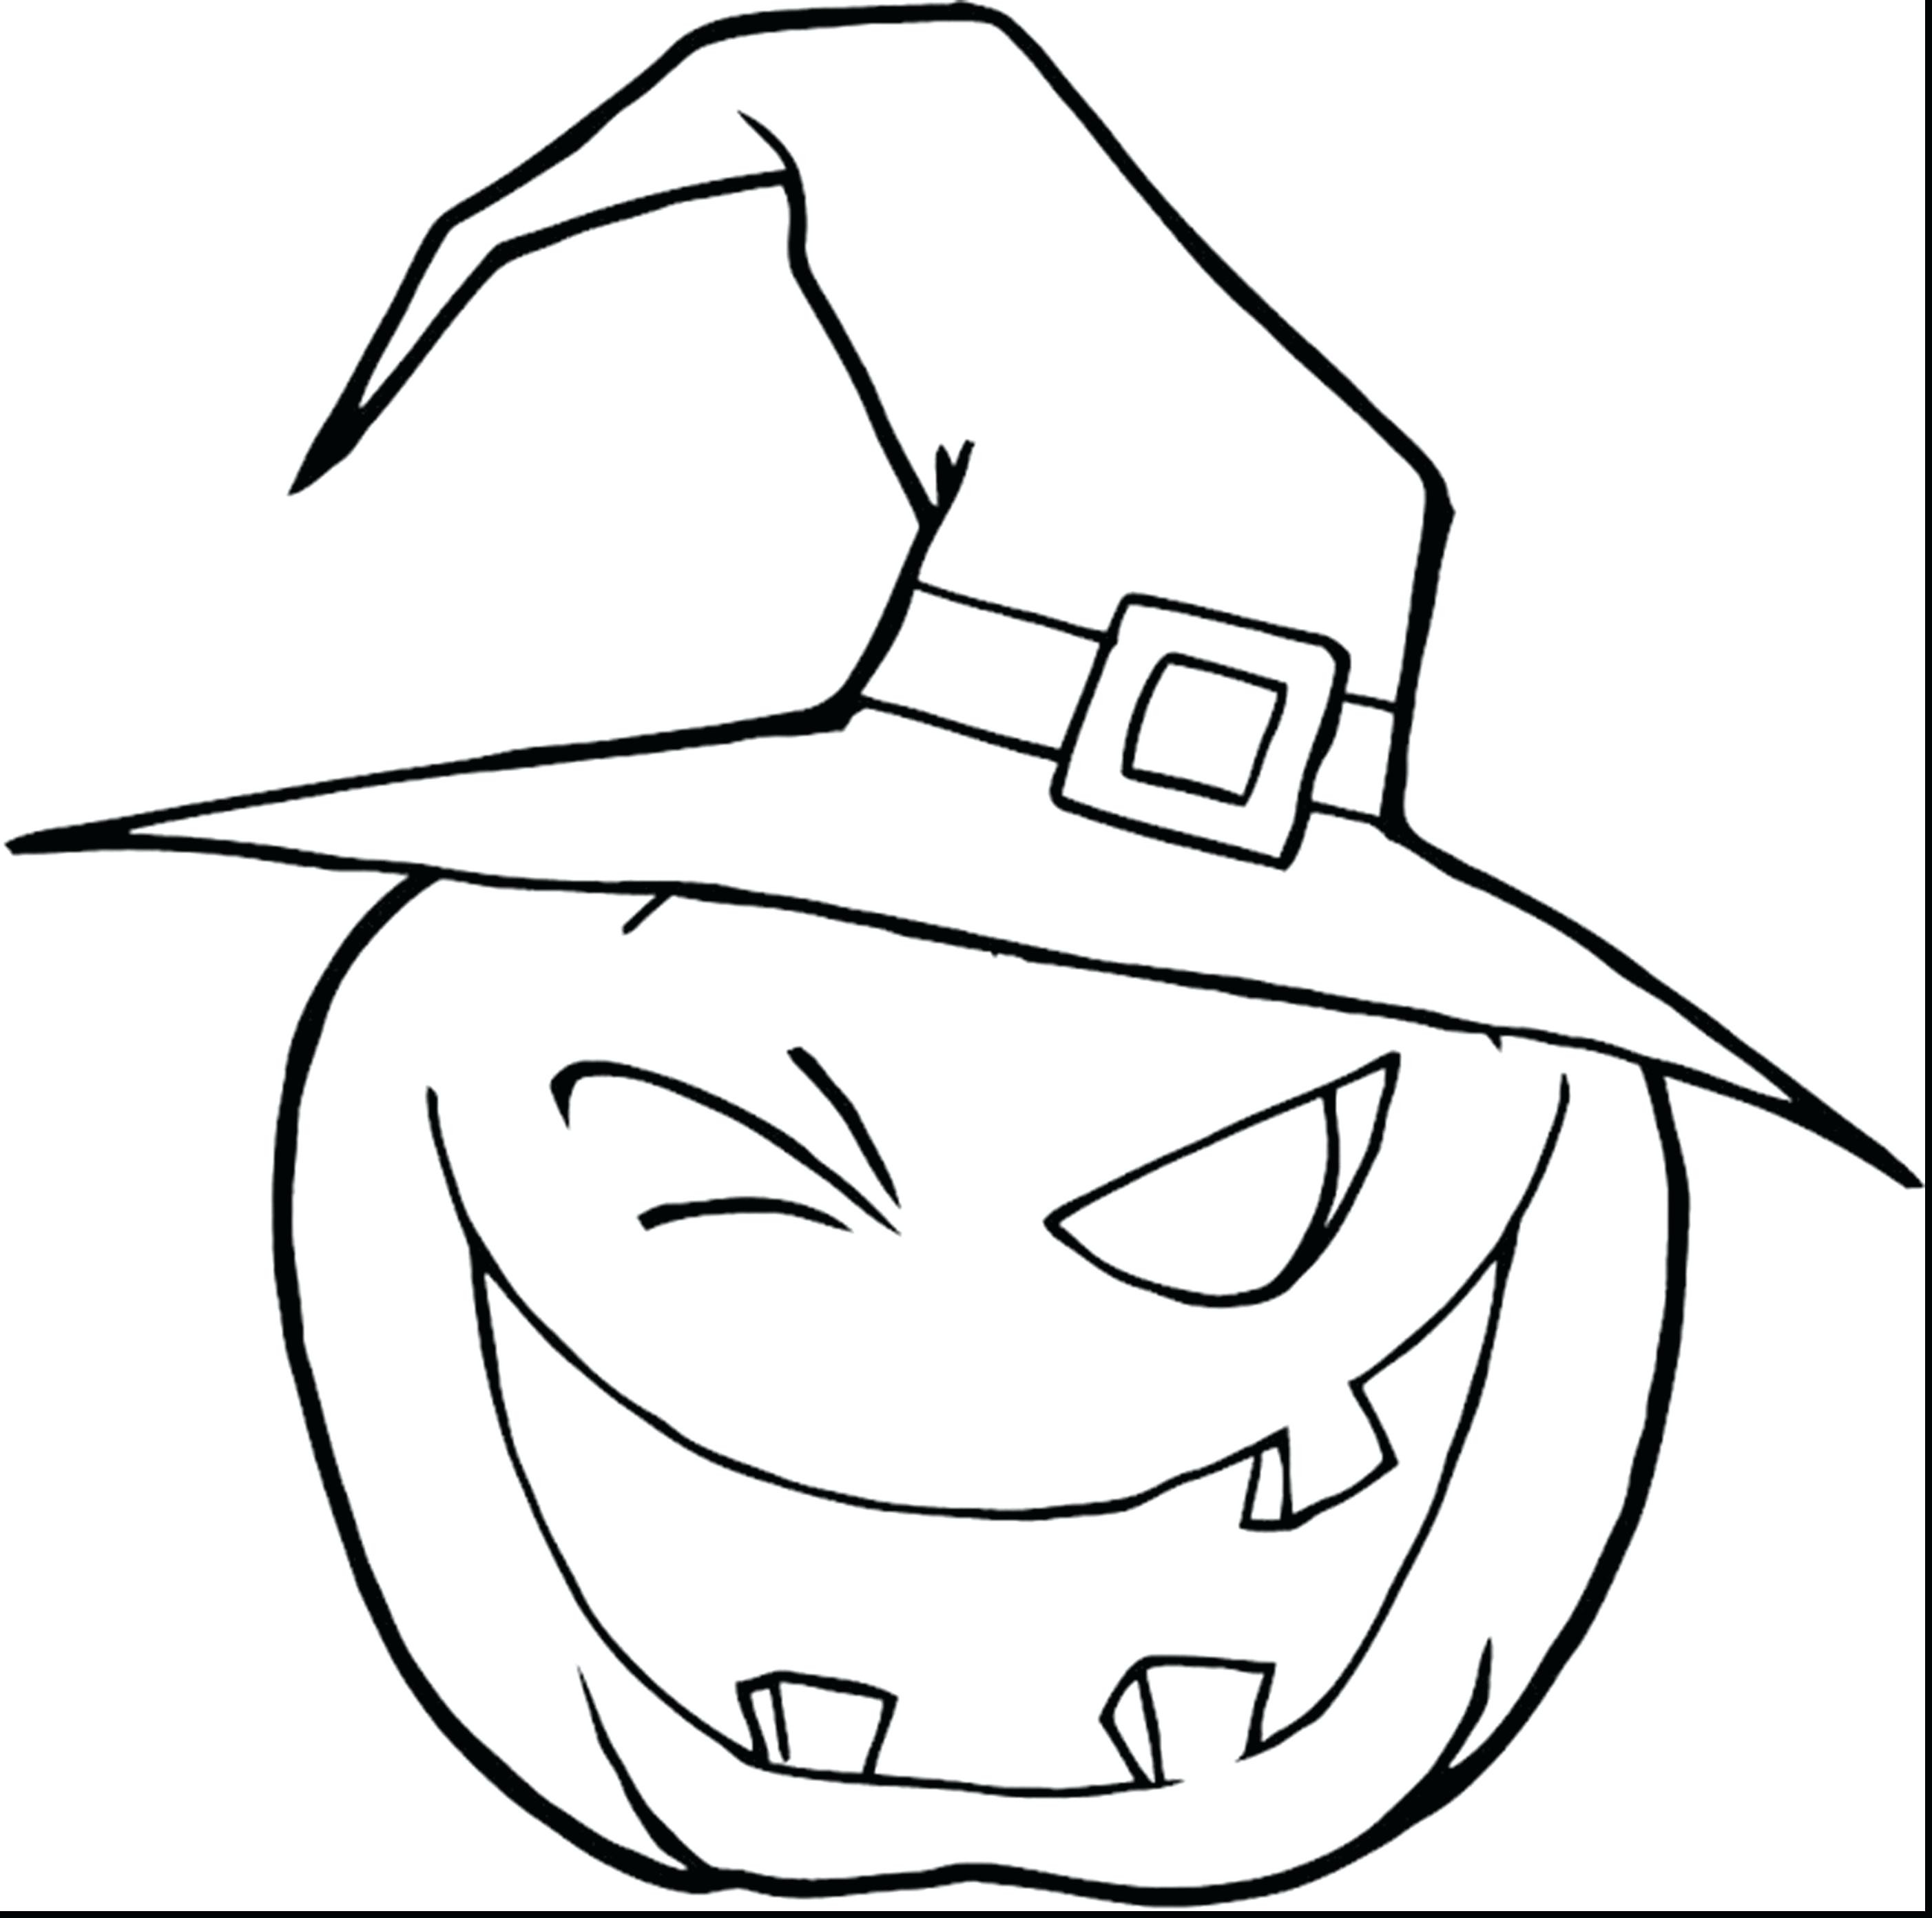 Pumpkin Face Coloring Pages at GetColorings com Free printable